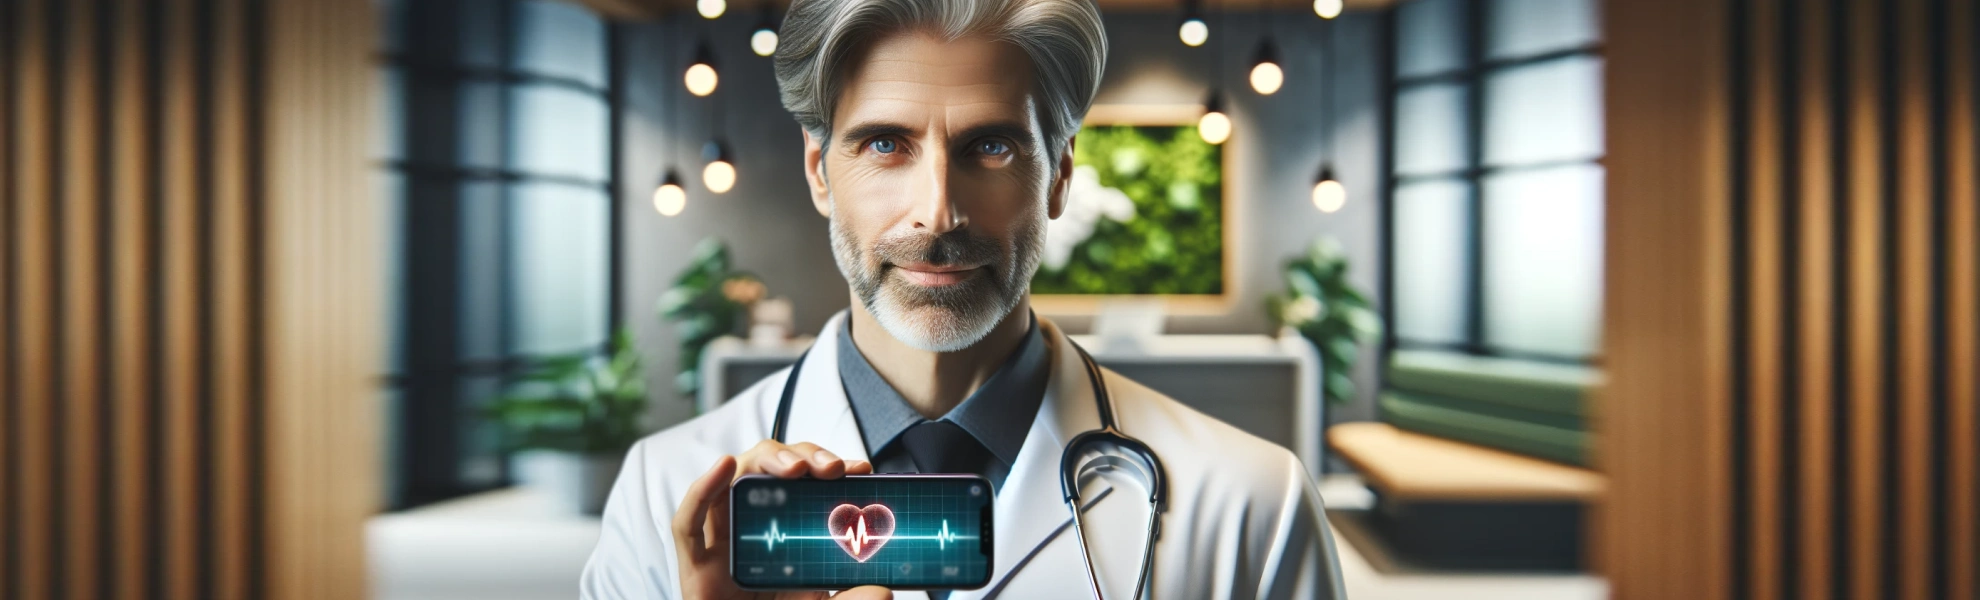 Discovering Key Healthcare & MedTech Mobile App Features